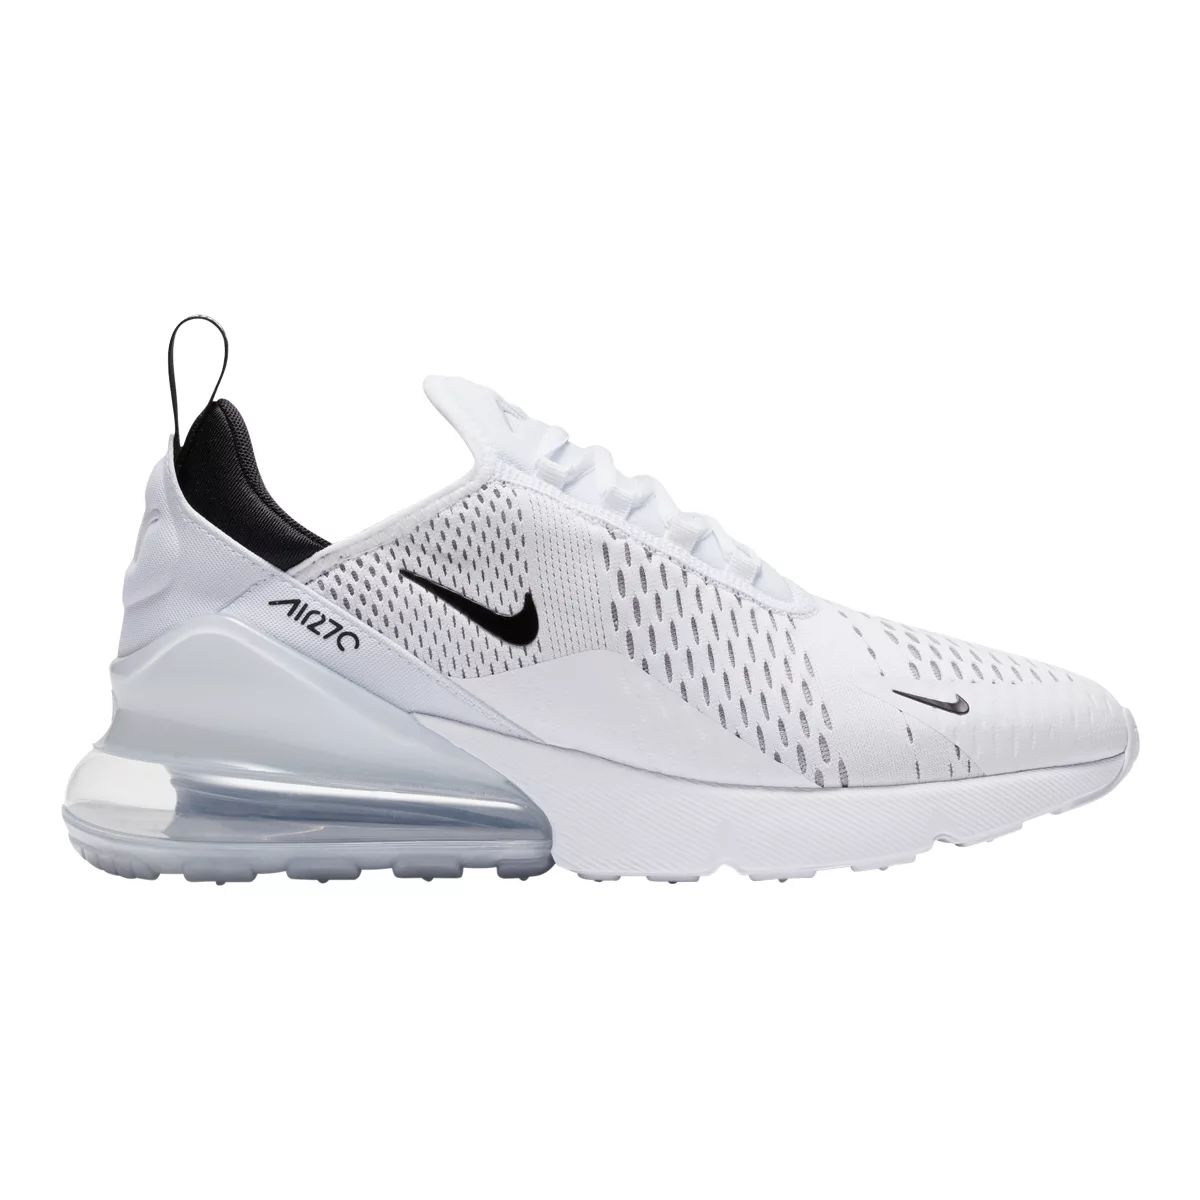 Image of Nike Men's Air Max 270 Shoes Sneakers Running Cushioned